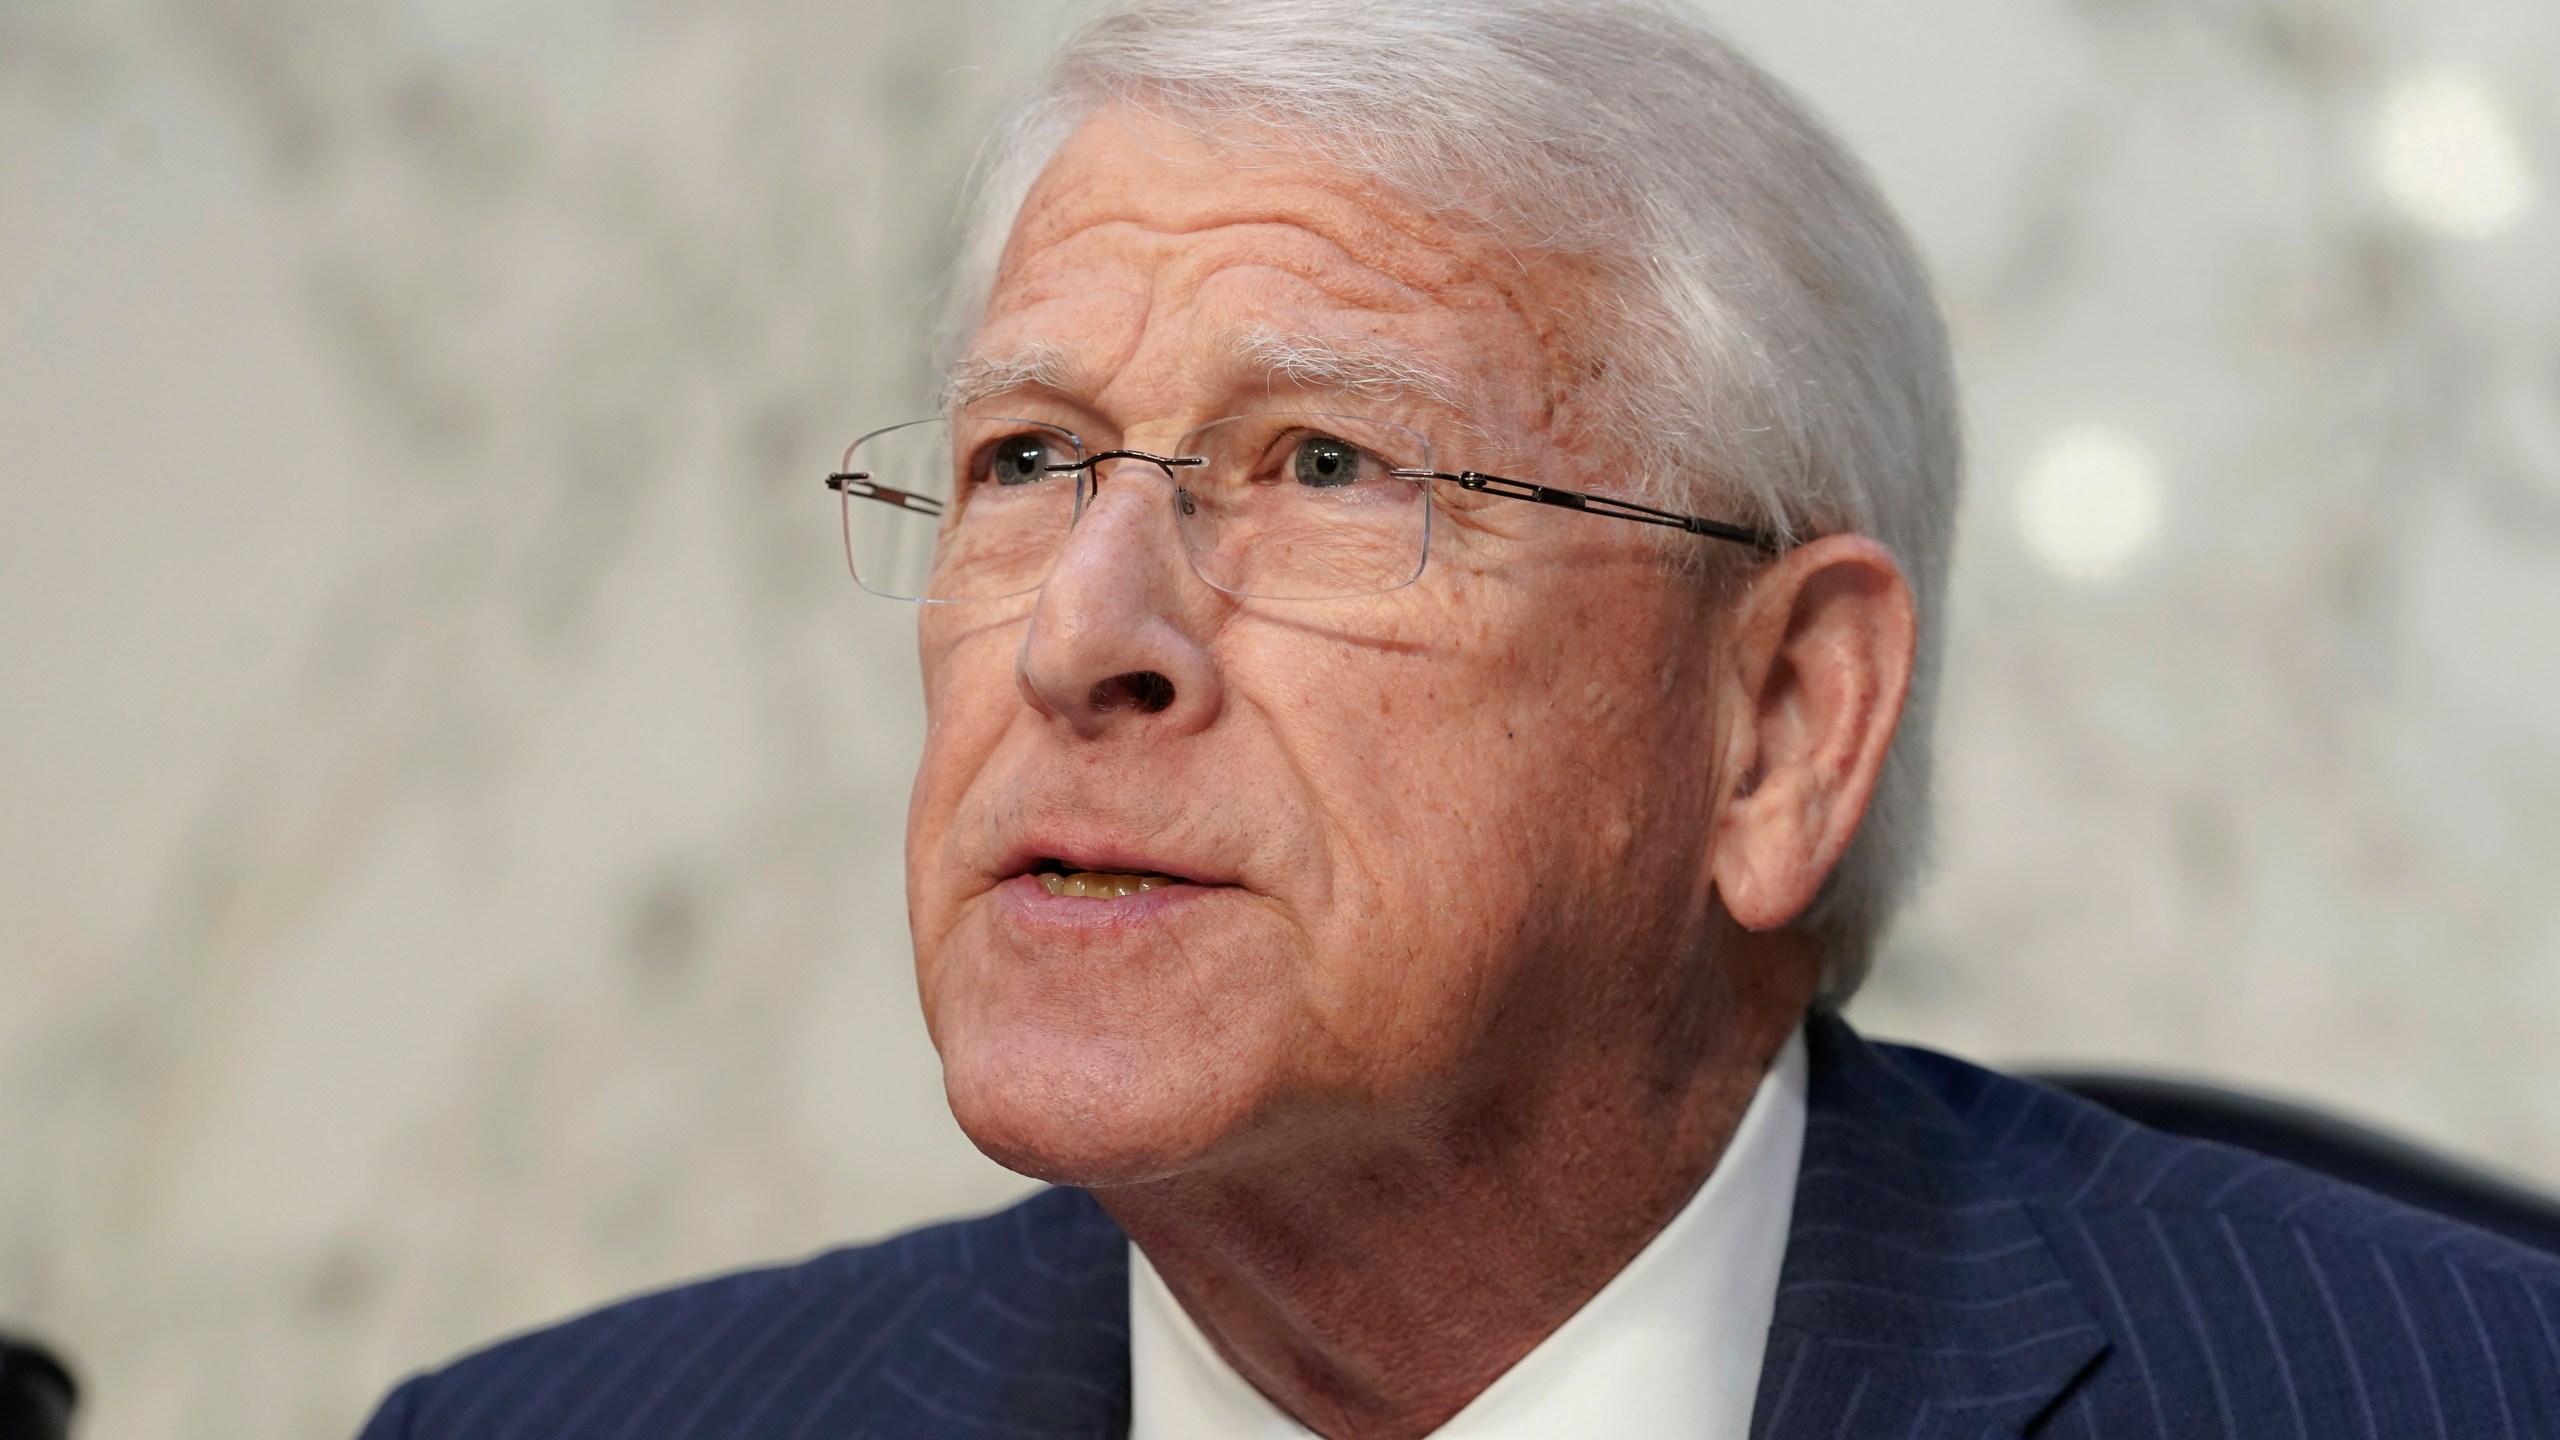 FILE - Sen. Roger Wicker, R-Miss., speaks during a Senate Armed Services Committee full committee hearing on the conflict in Ukraine Feb. 28, 2023, on Capitol Hill in Washington. In the Mississippi Republican primary for U.S. Senate, incumbent Roger Wicker seeks a fourth full term. (AP Photo/Mariam Zuhaib, File